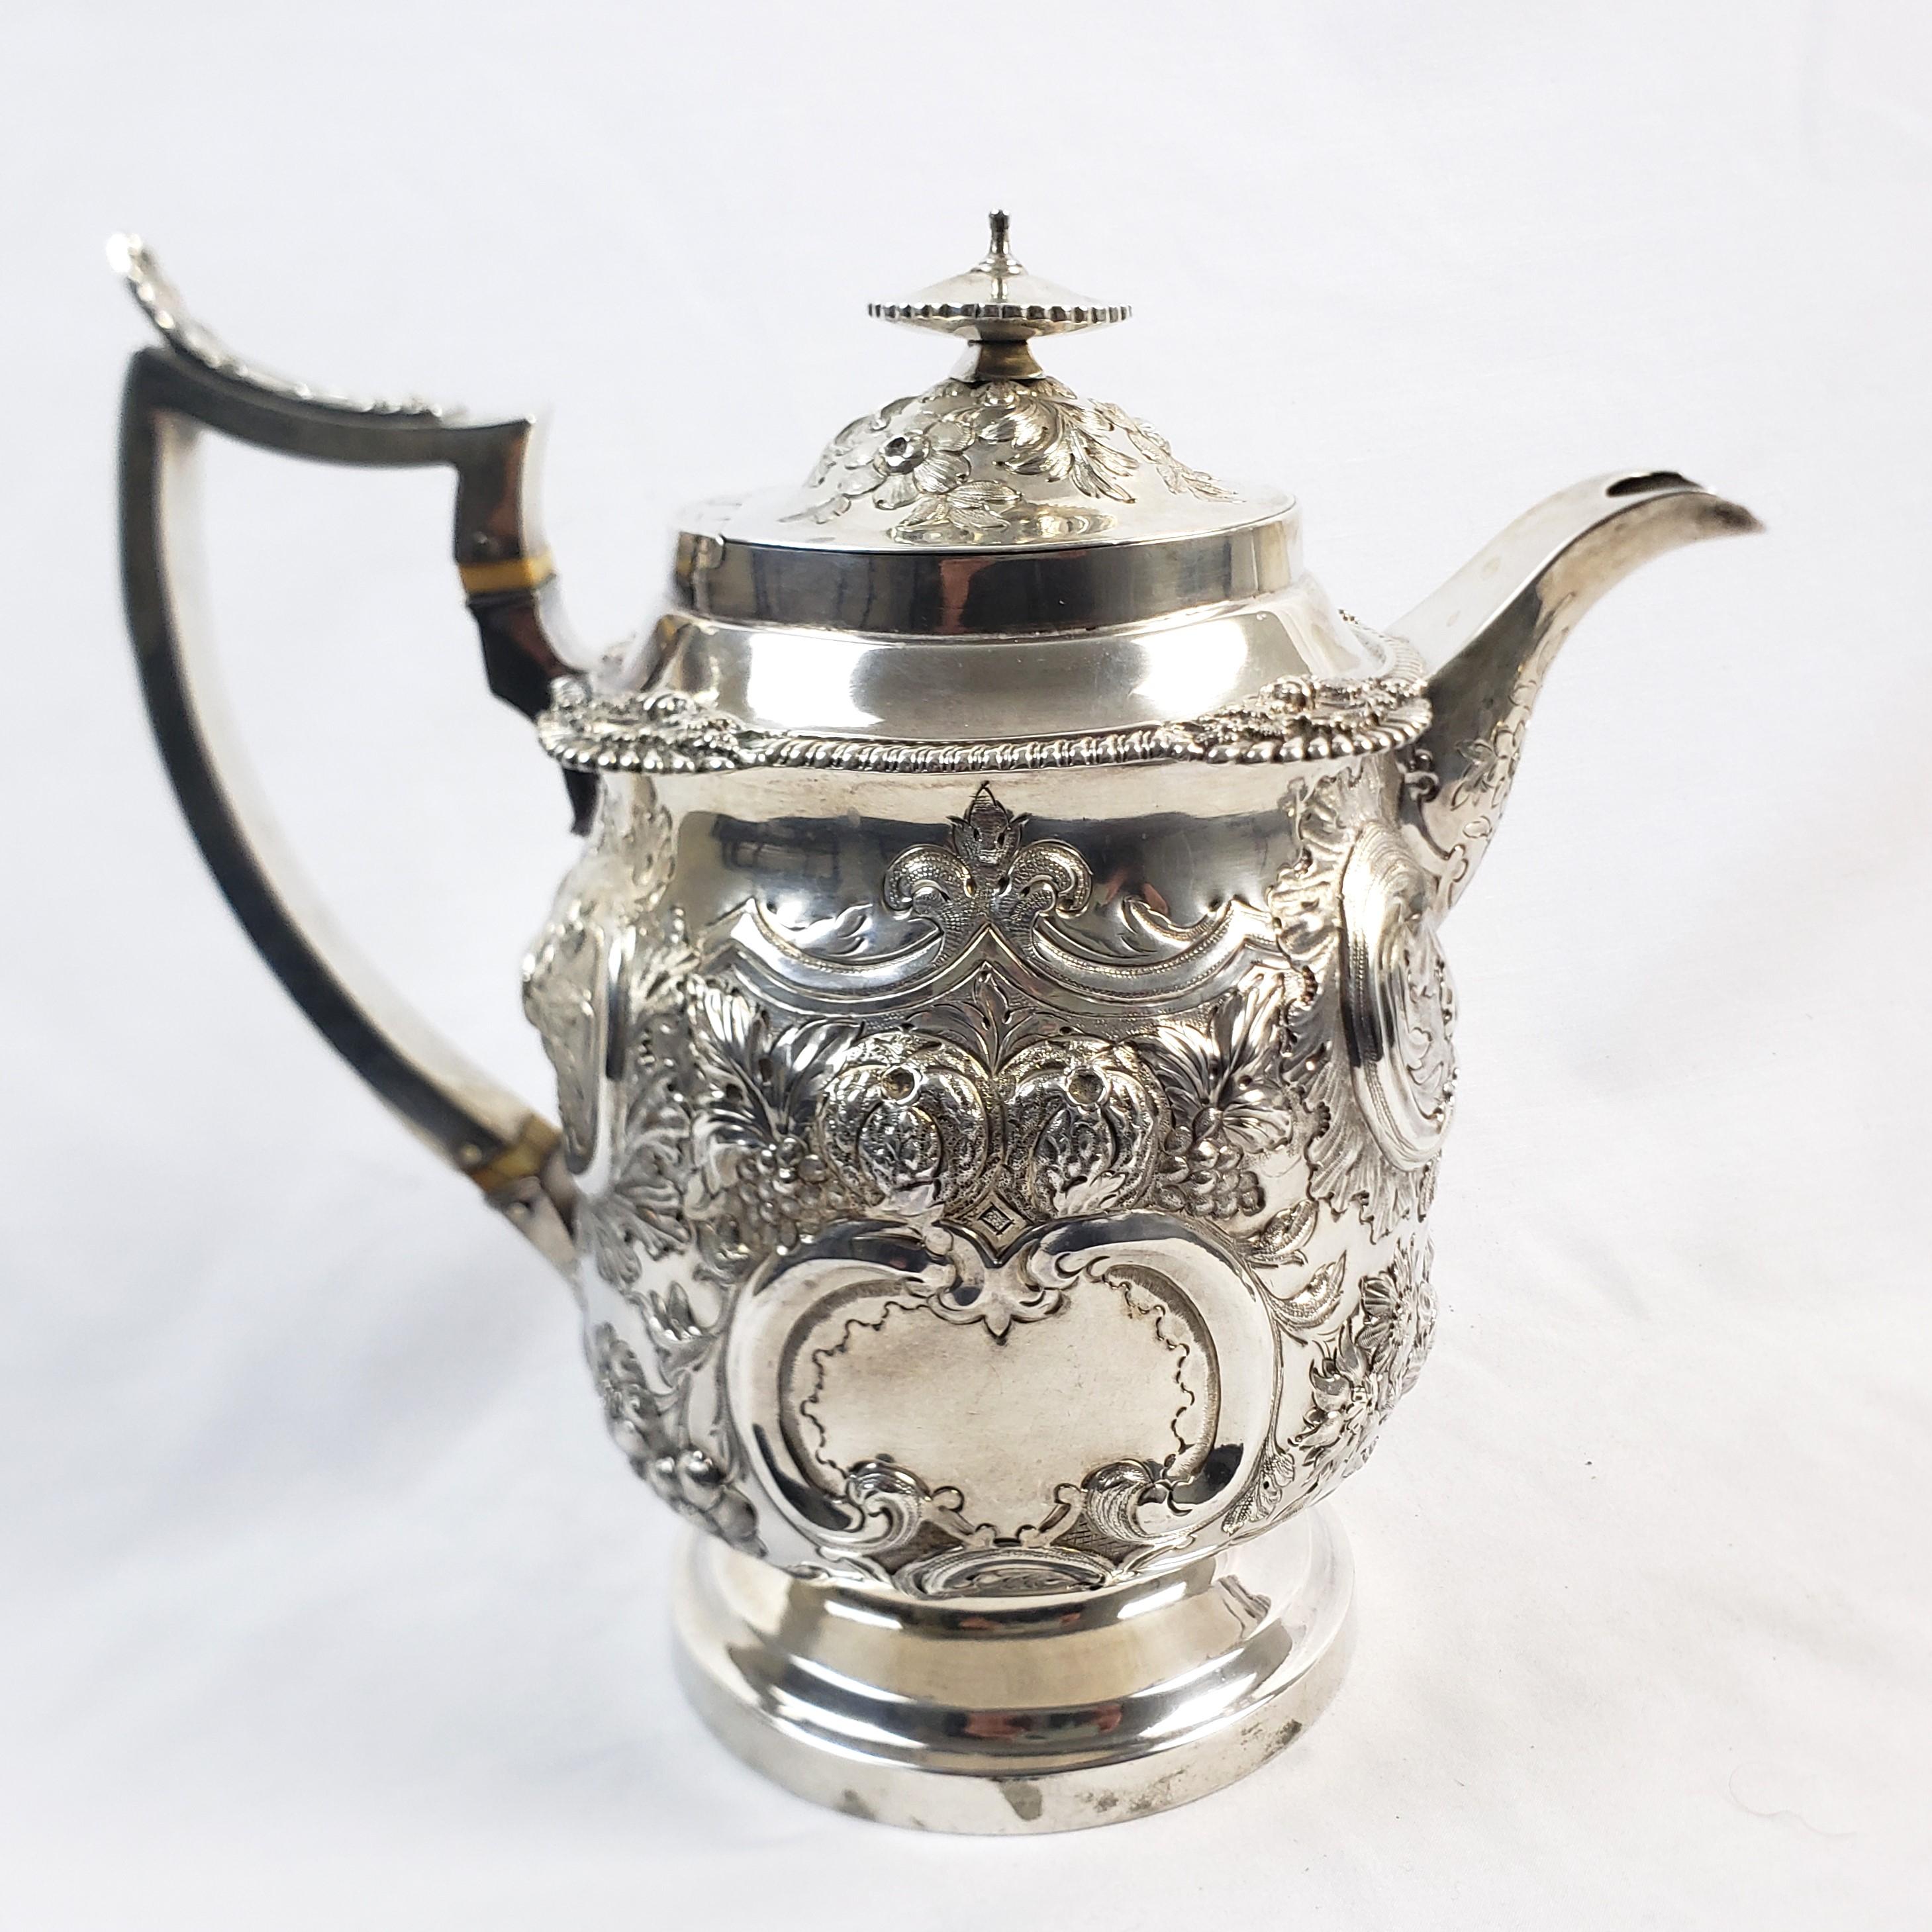 Large Antique Sterling Silver Georgian Teapot with Ornate Repousse Decoration In Good Condition For Sale In Hamilton, Ontario